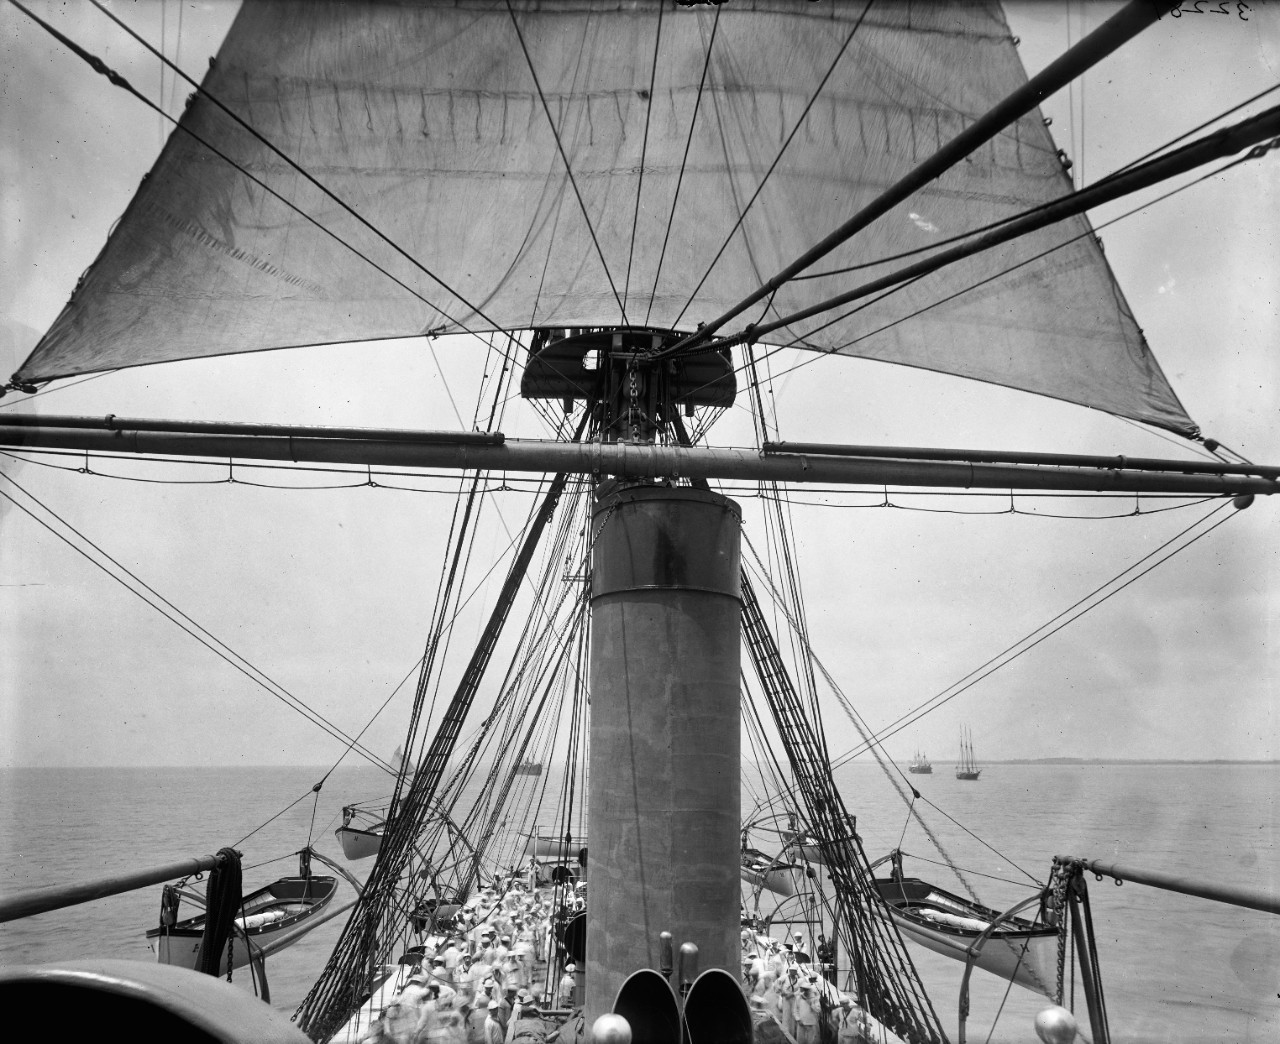 LC-DIG-DET-4a16529:  USS Hartford (1859-1926), sloop-of-war, 1894-1905.  View from aft from foretop.   Photographed by Detroit Publishing Company, between 1894-1905. Courtesy of the Library of Congress.   (2015/6/12).